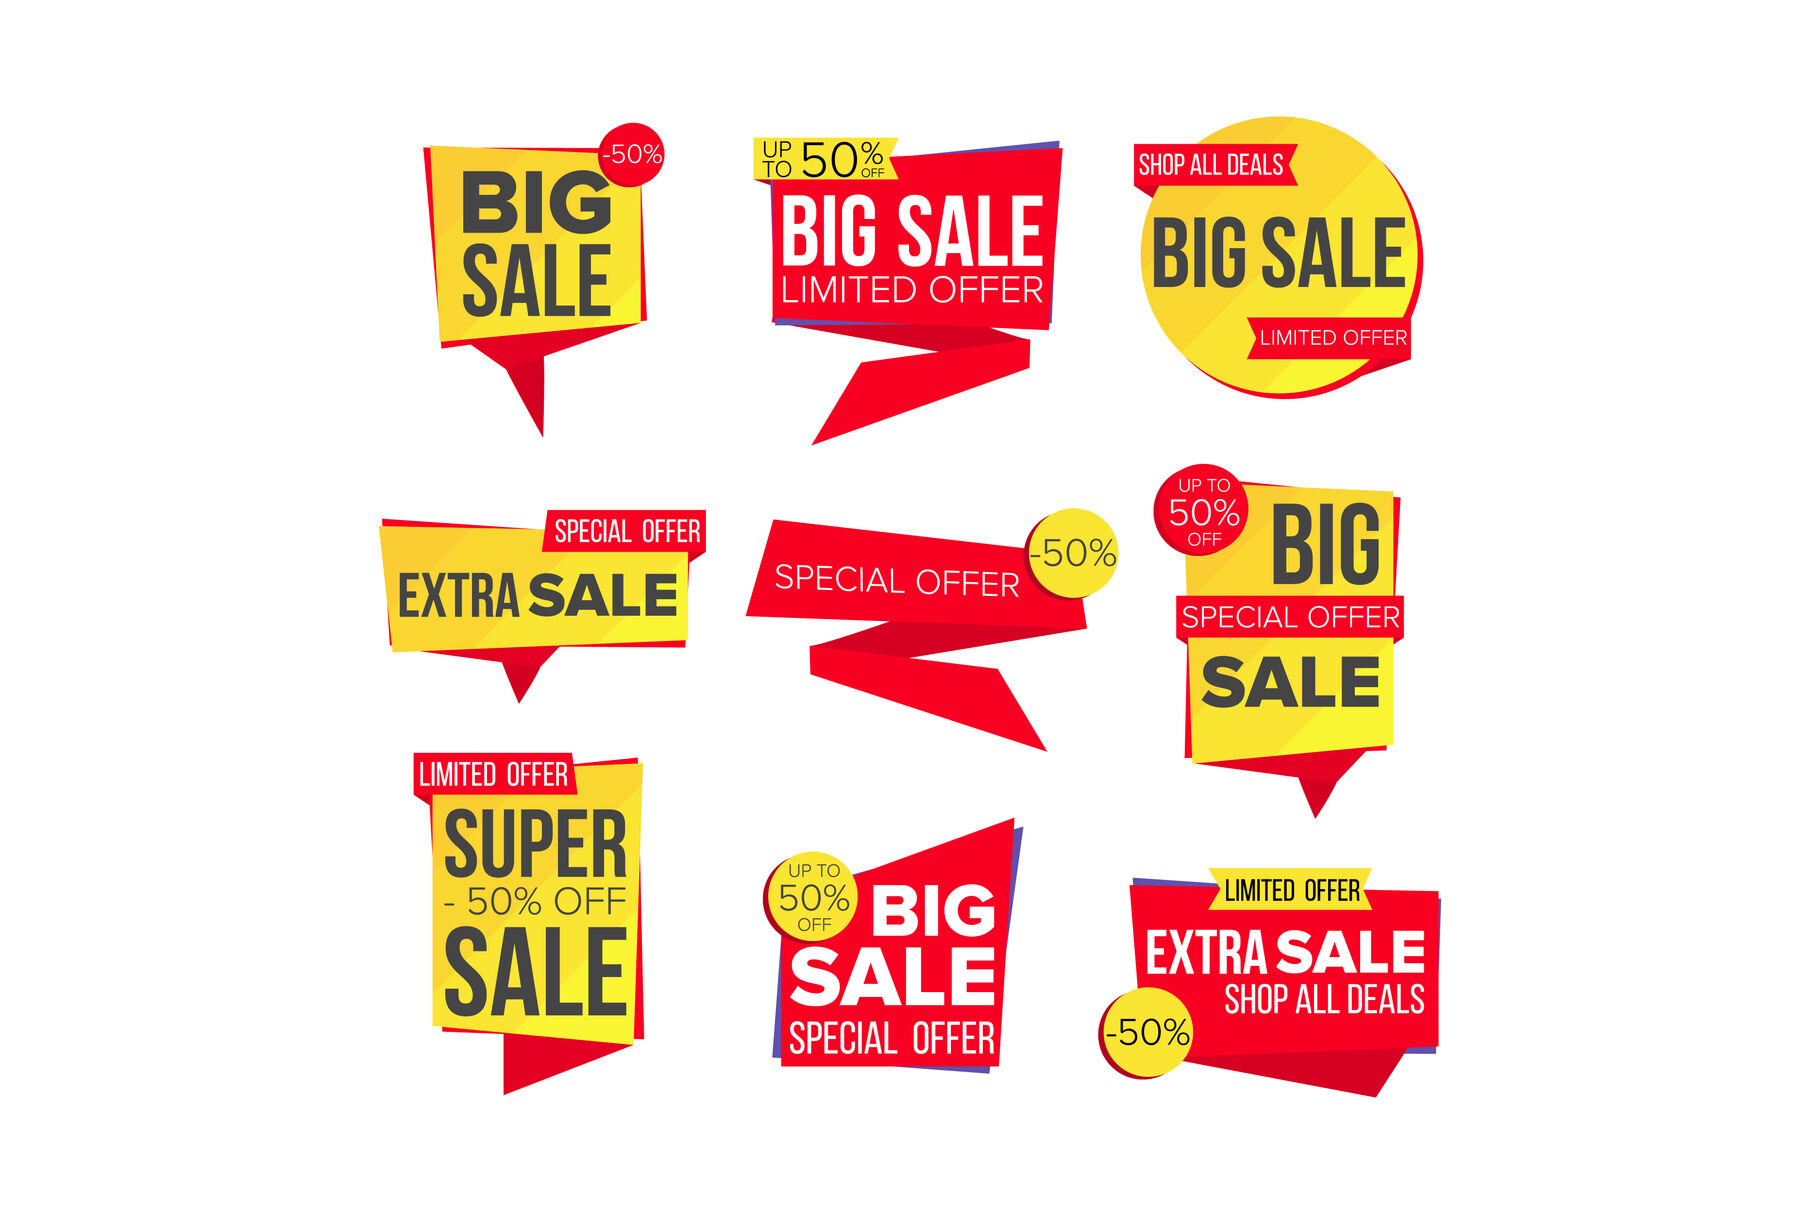 Special offer sale red tag 50 off isolated Vector Image